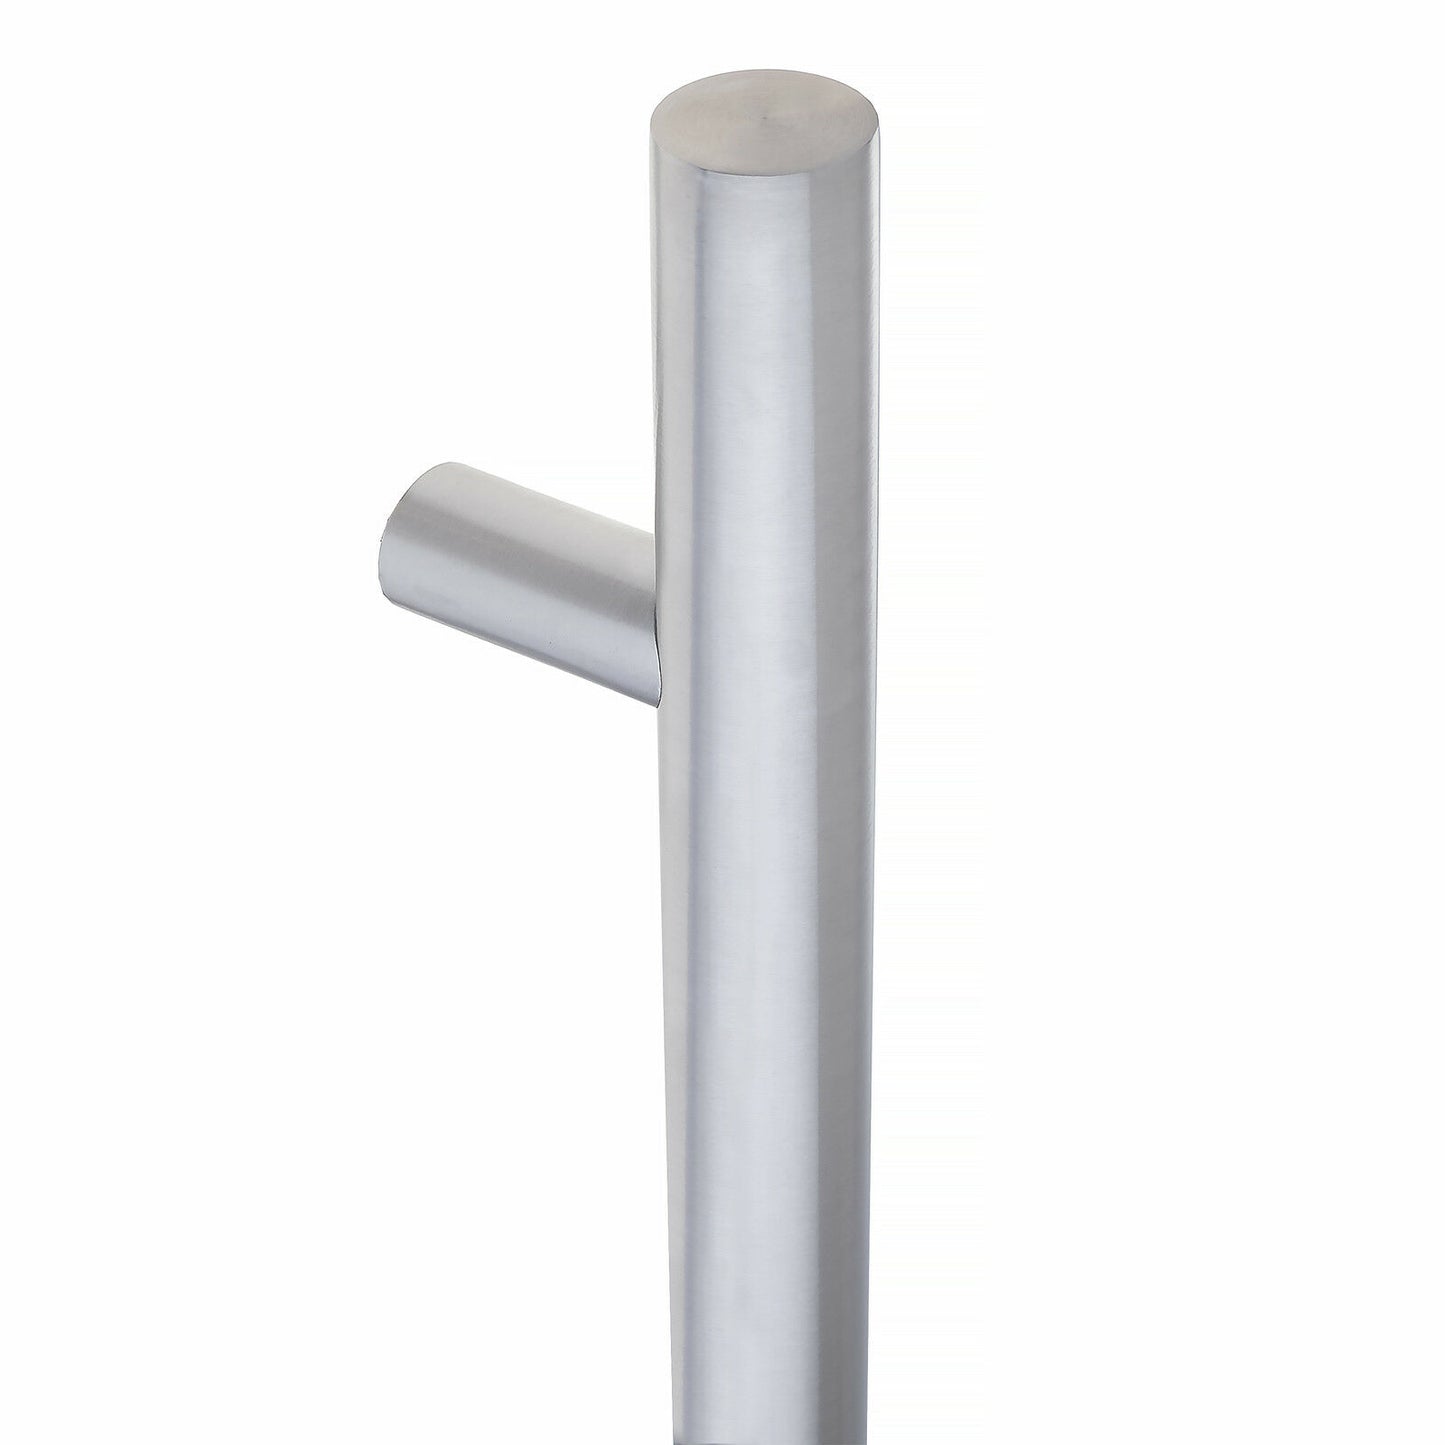 Pair Of Satin Stainless Steel Straight T Bar Guardsman Pull Handles 2000 x 30mm